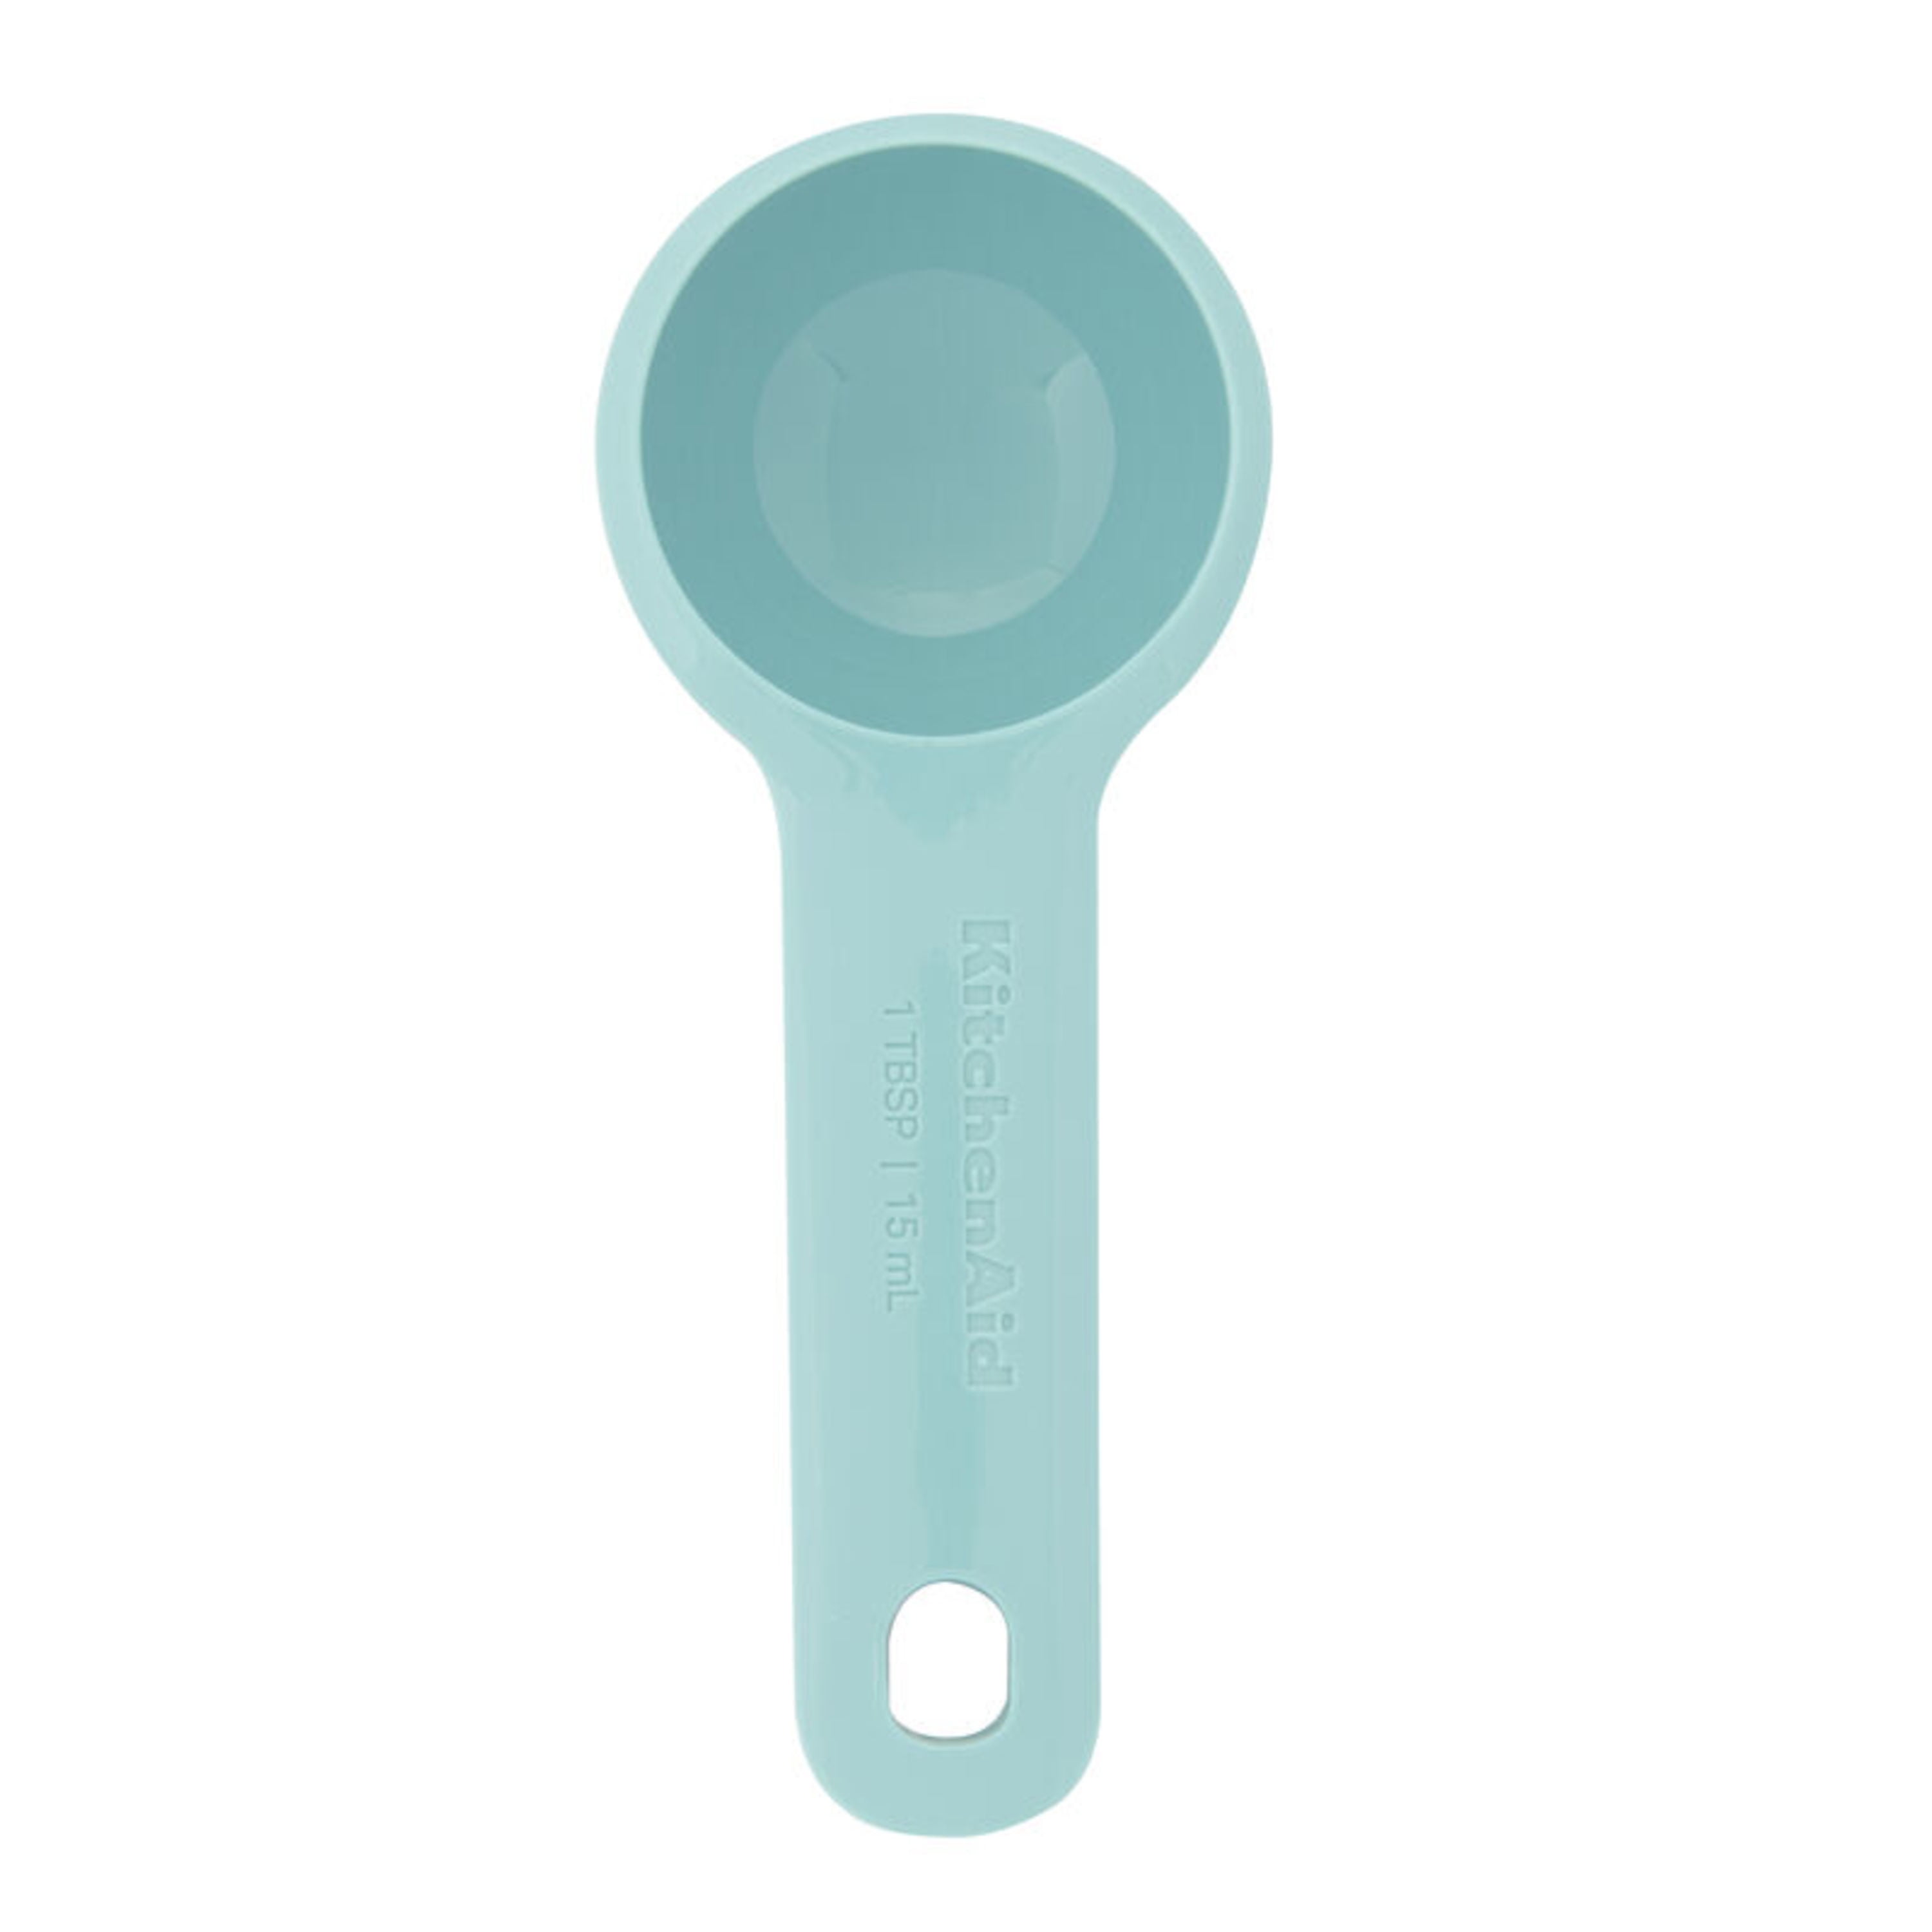 KitchInventions 1001 Spoon Buddy, Red - 11 x 8.5 x 2 in.